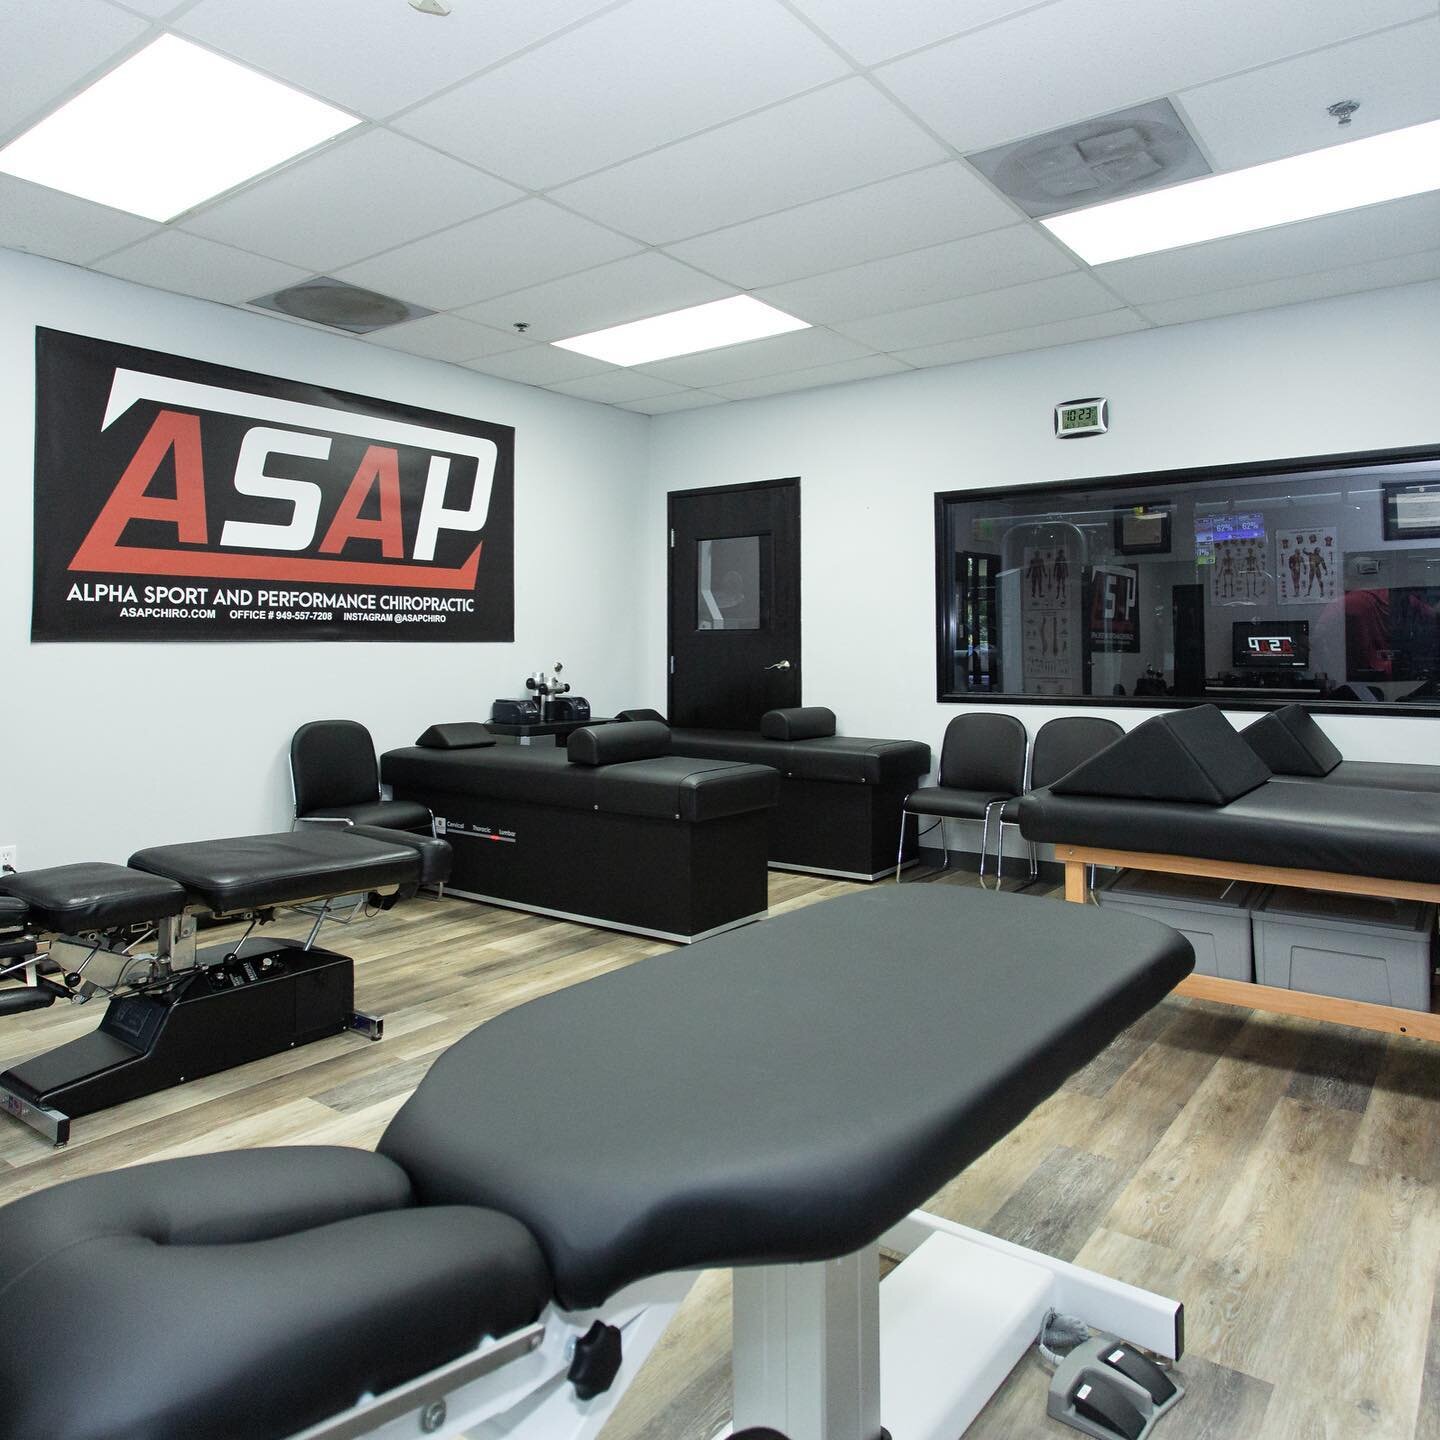 Open the door to a healthier you in 2021 at ASAP Chiropractic! Located in Racho Santa Margarita, our space is equipped with everything you need for your chiropractic health! 

...

💪 Comment your 2021 health goals below! 💪

...

#asapchiro #chiro #